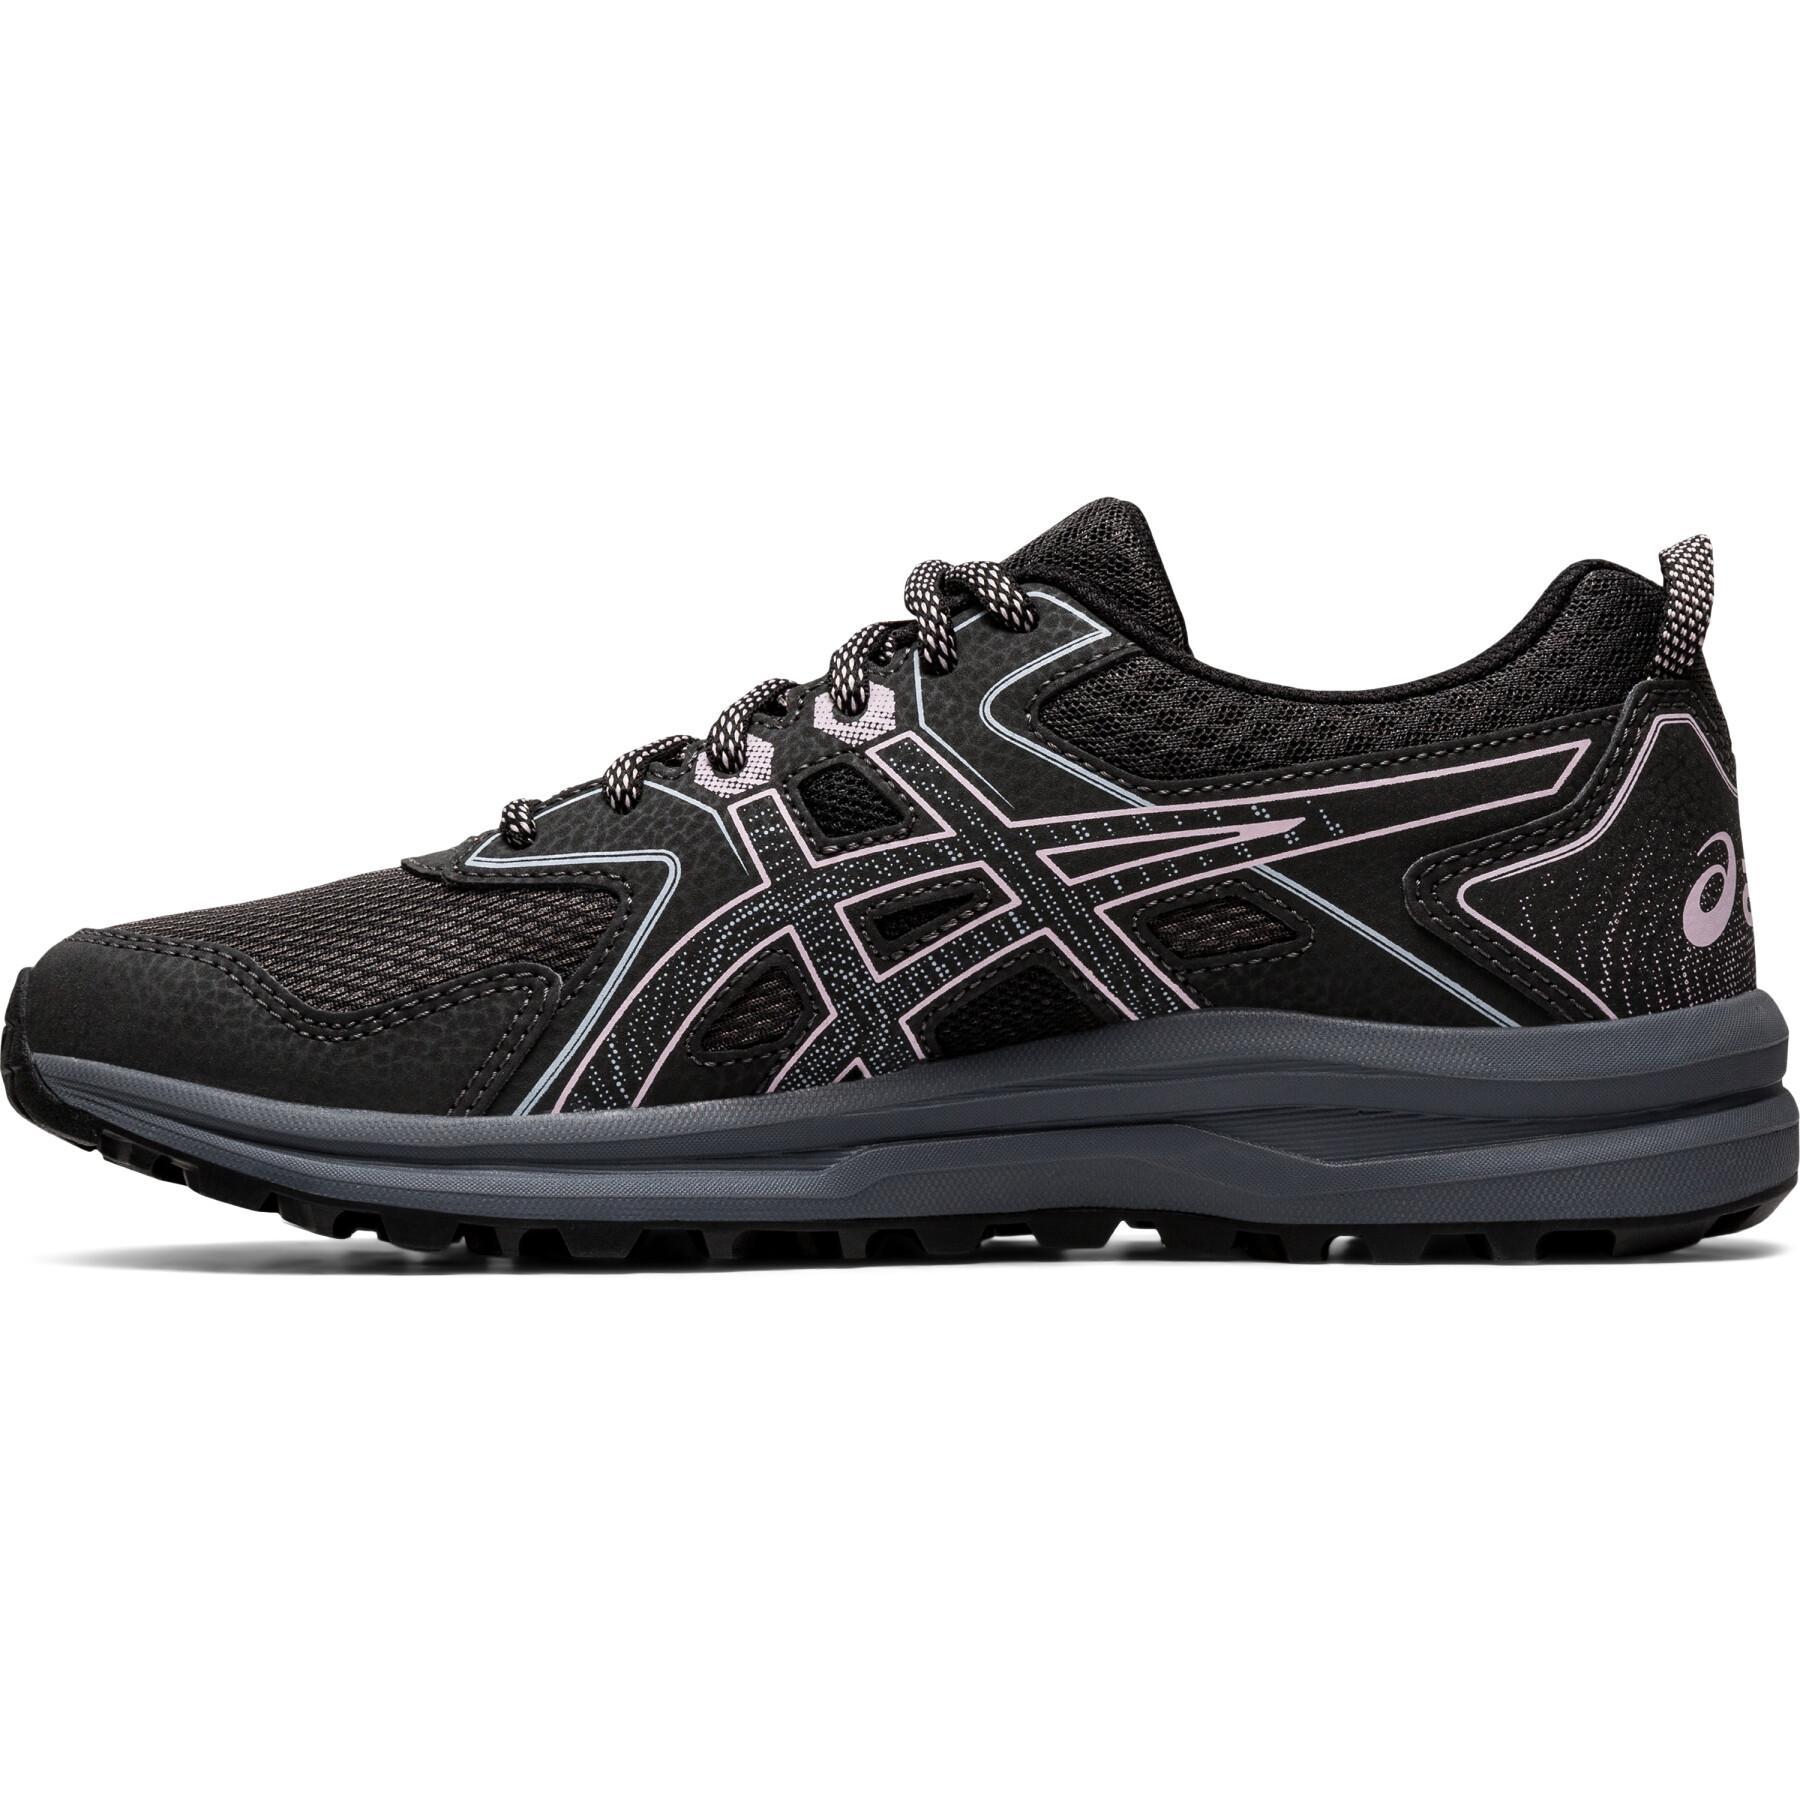 Chaussures femme Asics Trailout